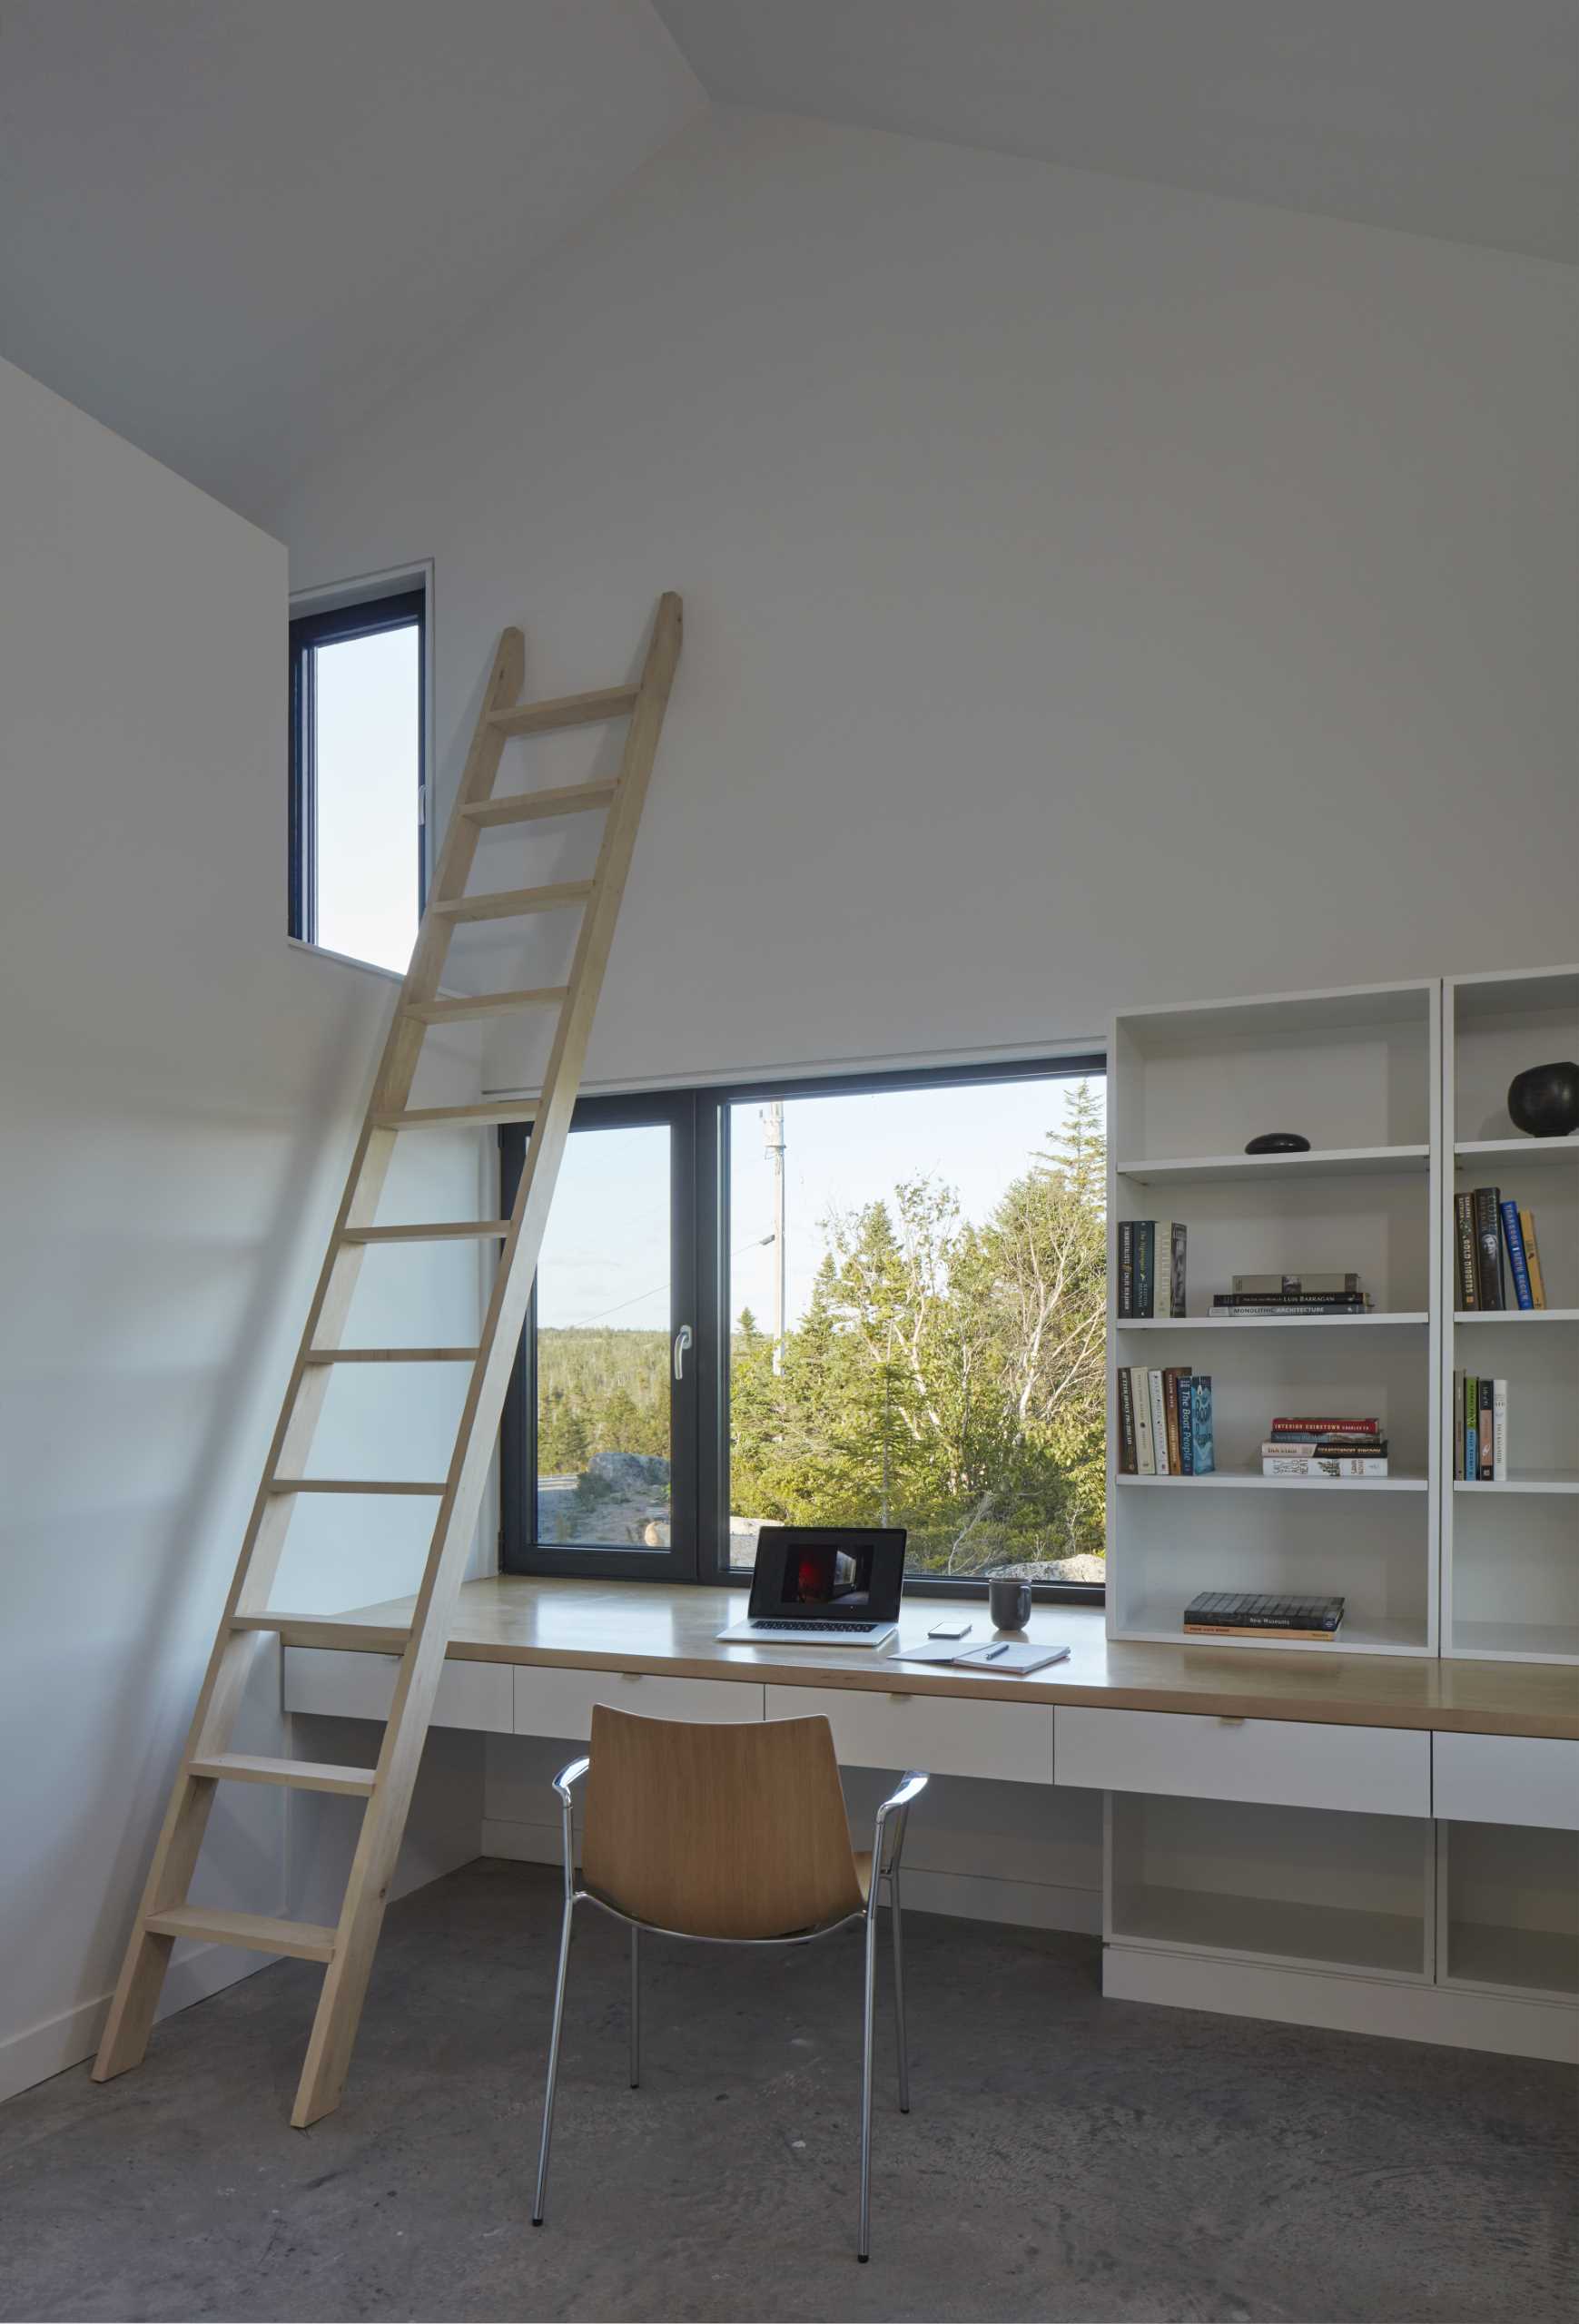 In this modern bedroom, there's a built-in desk and a ladder leading to a loft.